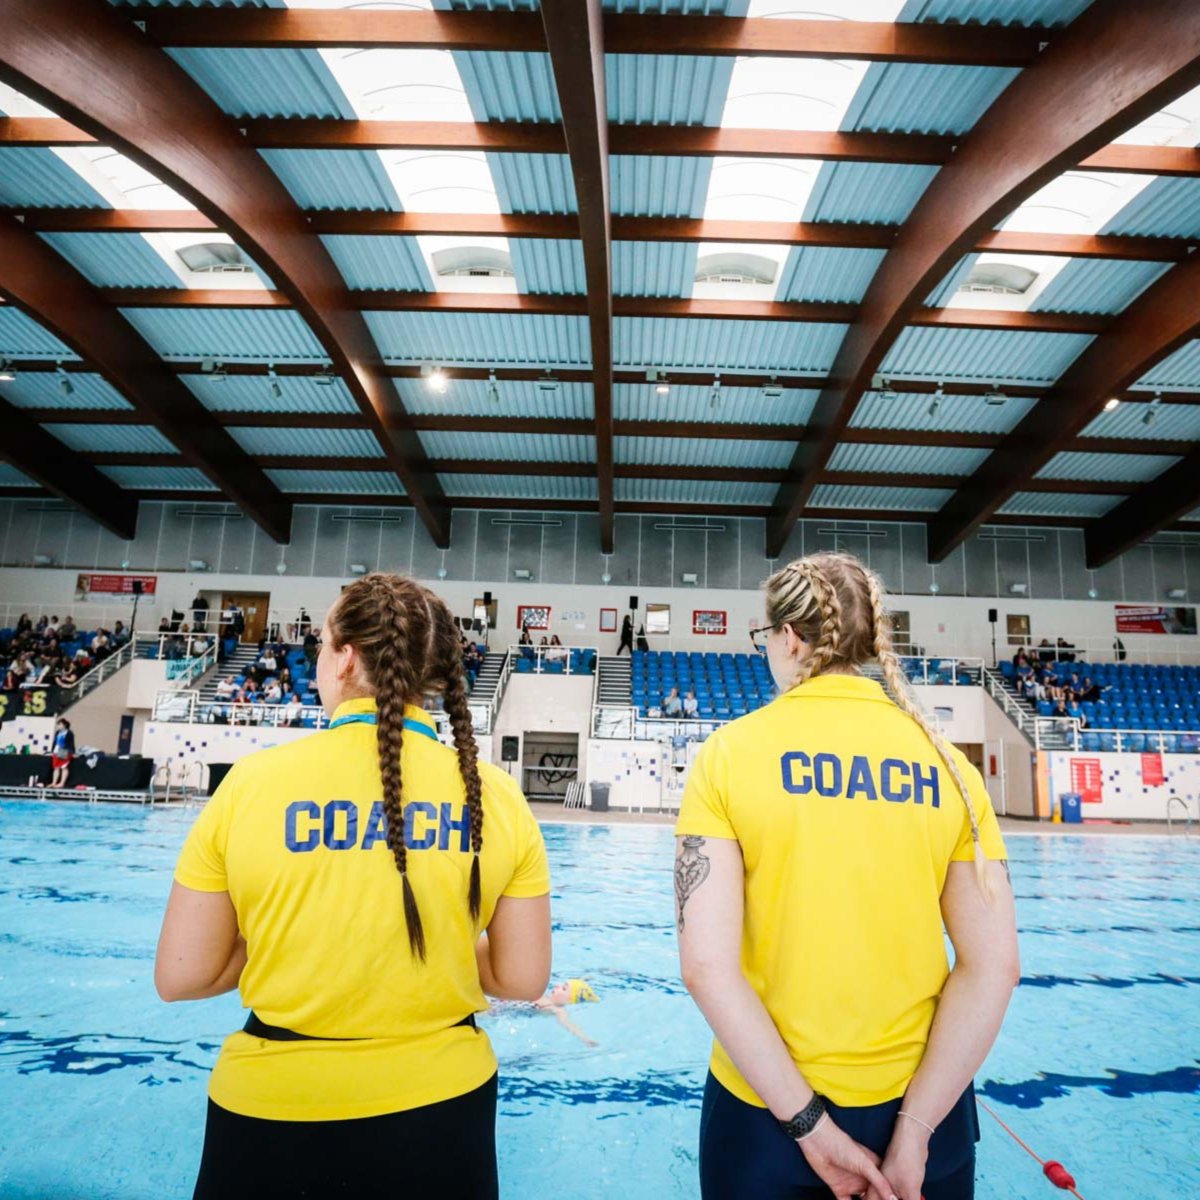 🏊‍♀️ We're excited to be attending the upcoming GoCardless @Swim_England Water Polo National Age Group Championships U17 & U19 this Saturday, 20th April, at GL1 Gloucester. We're looking forward to meeting clubs and members there! bit.ly/46TwS3H